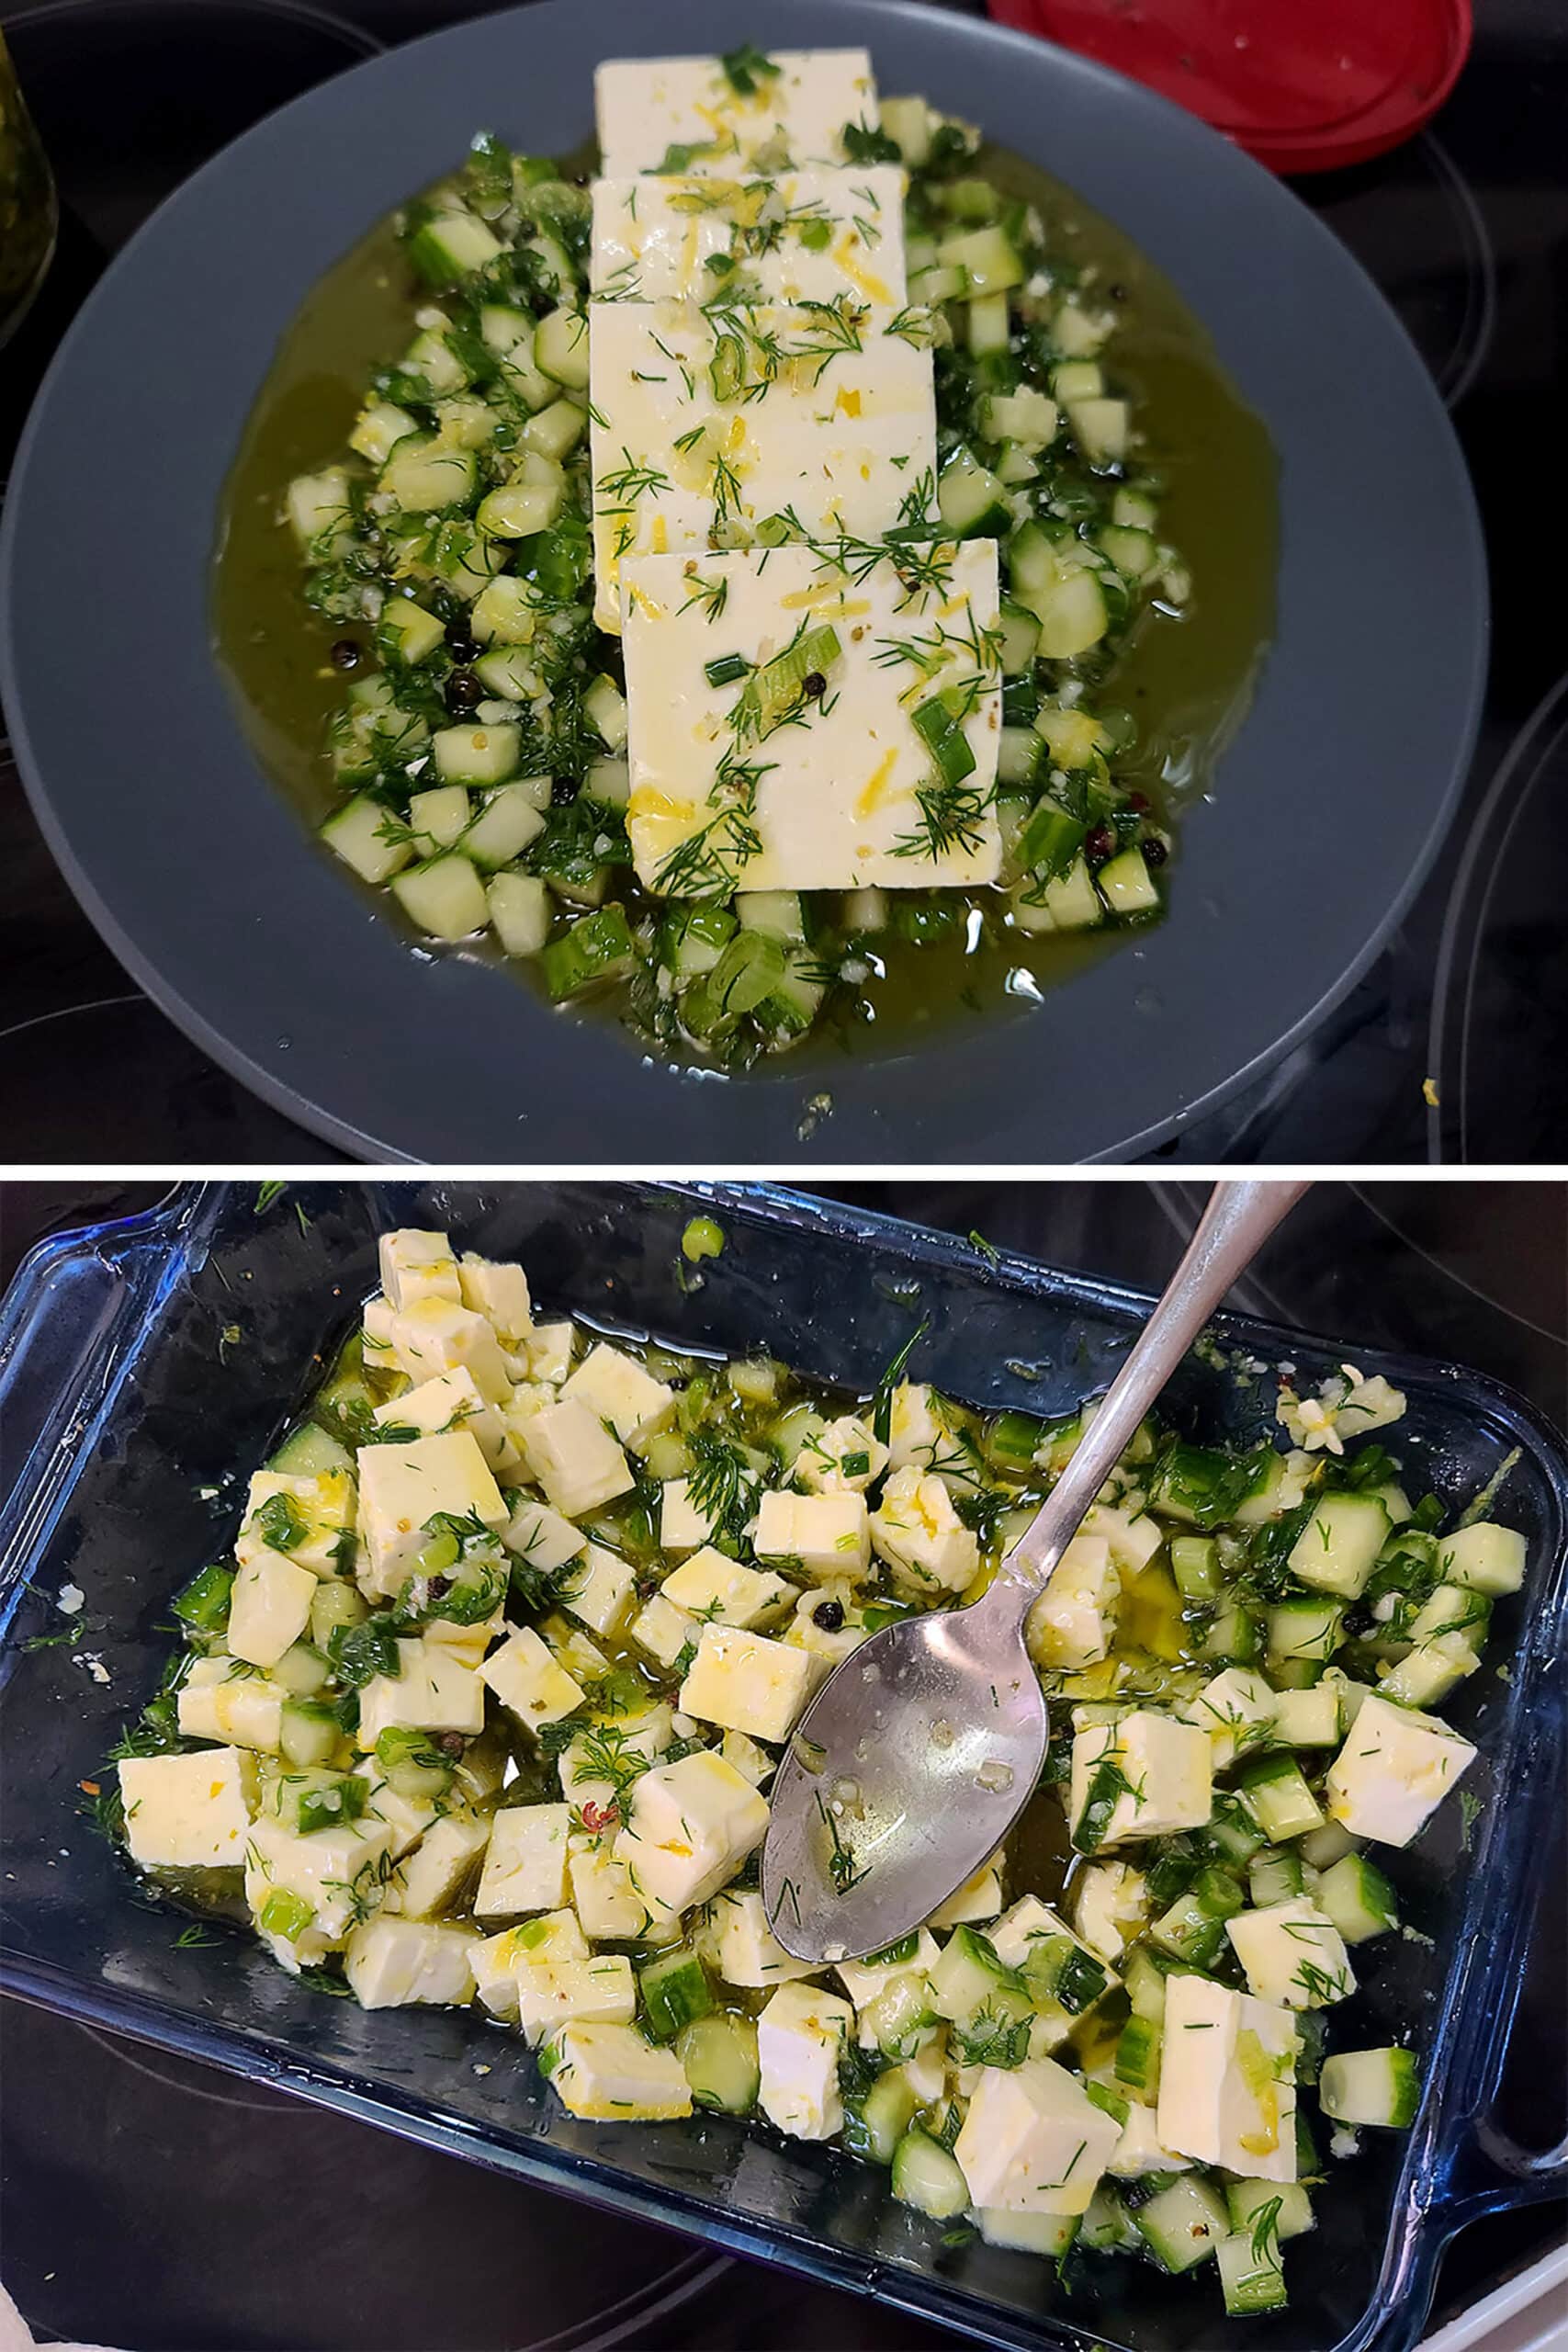 A 2 part image showing slices of marinated feta on a plate, surrounded with cucumber, and marinated feta cubes in a bowl.